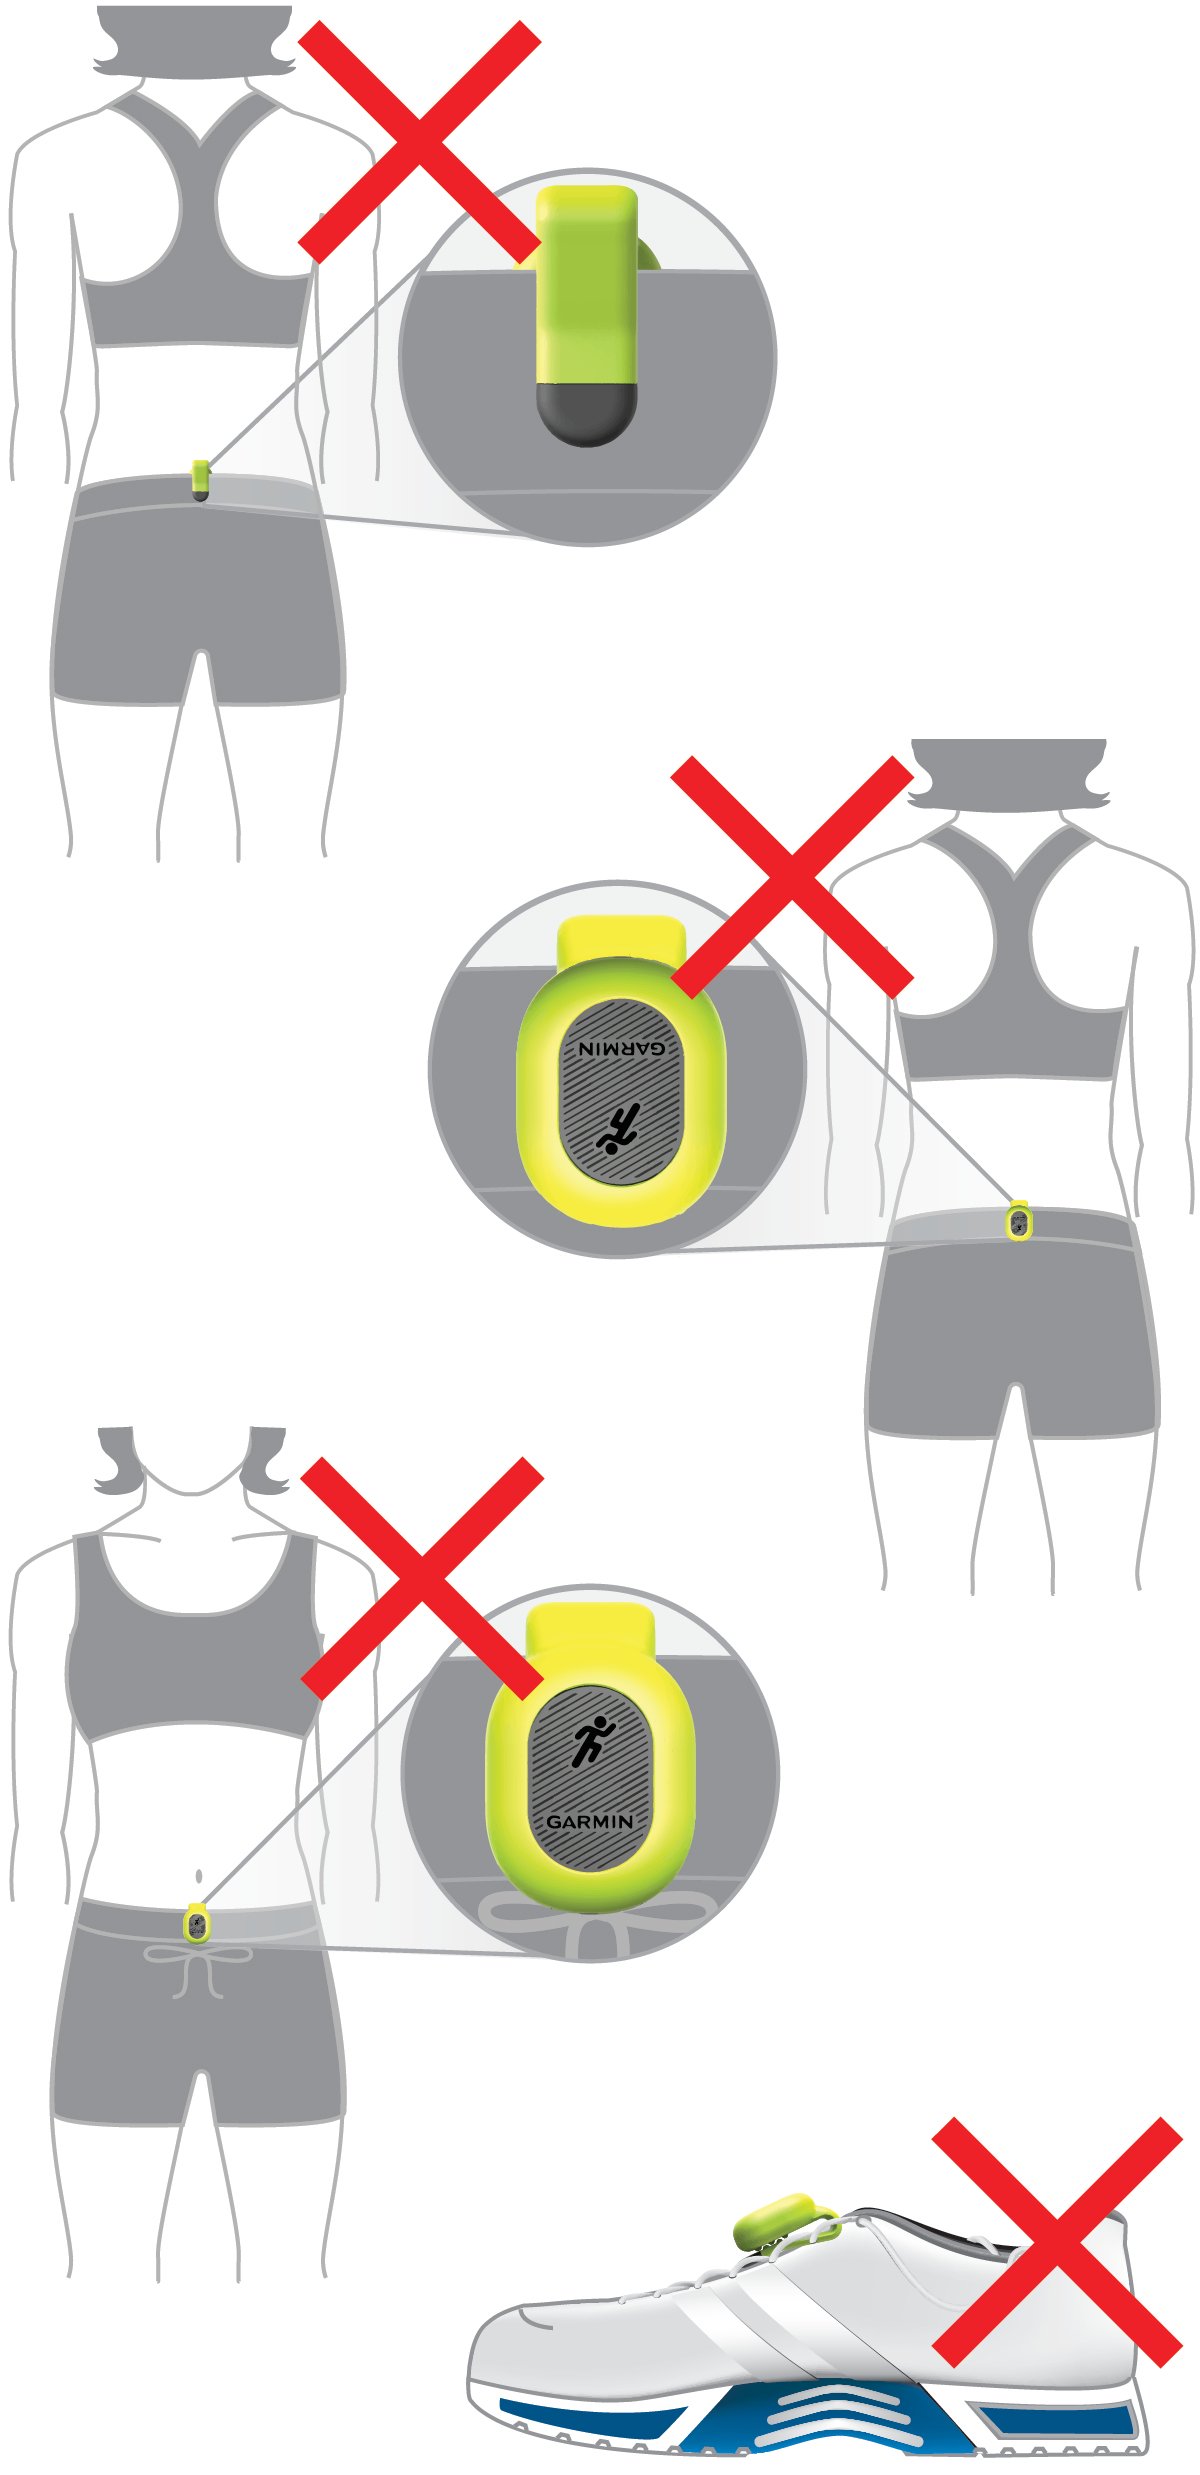 Restrictions for wearing the pod